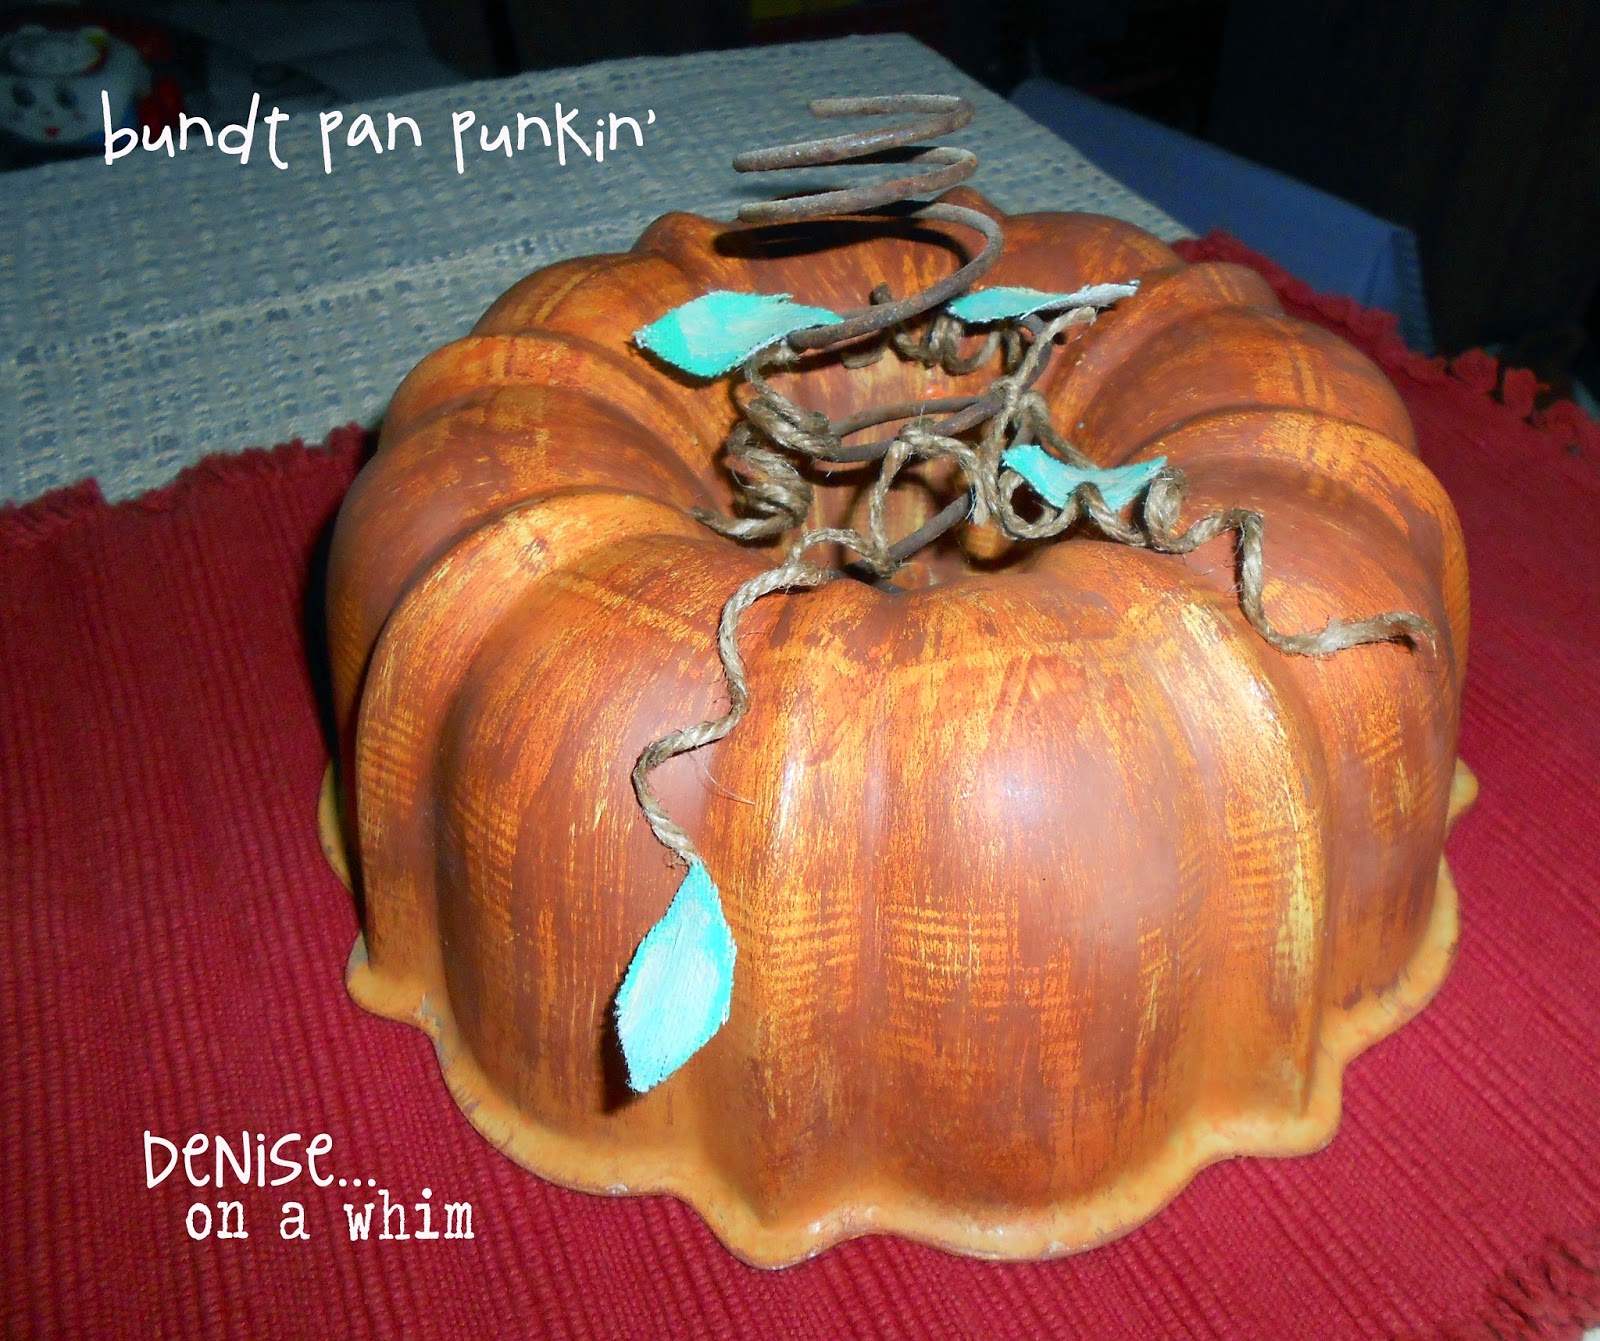 Bundt Pan Pumpkin from Denise on a Whim